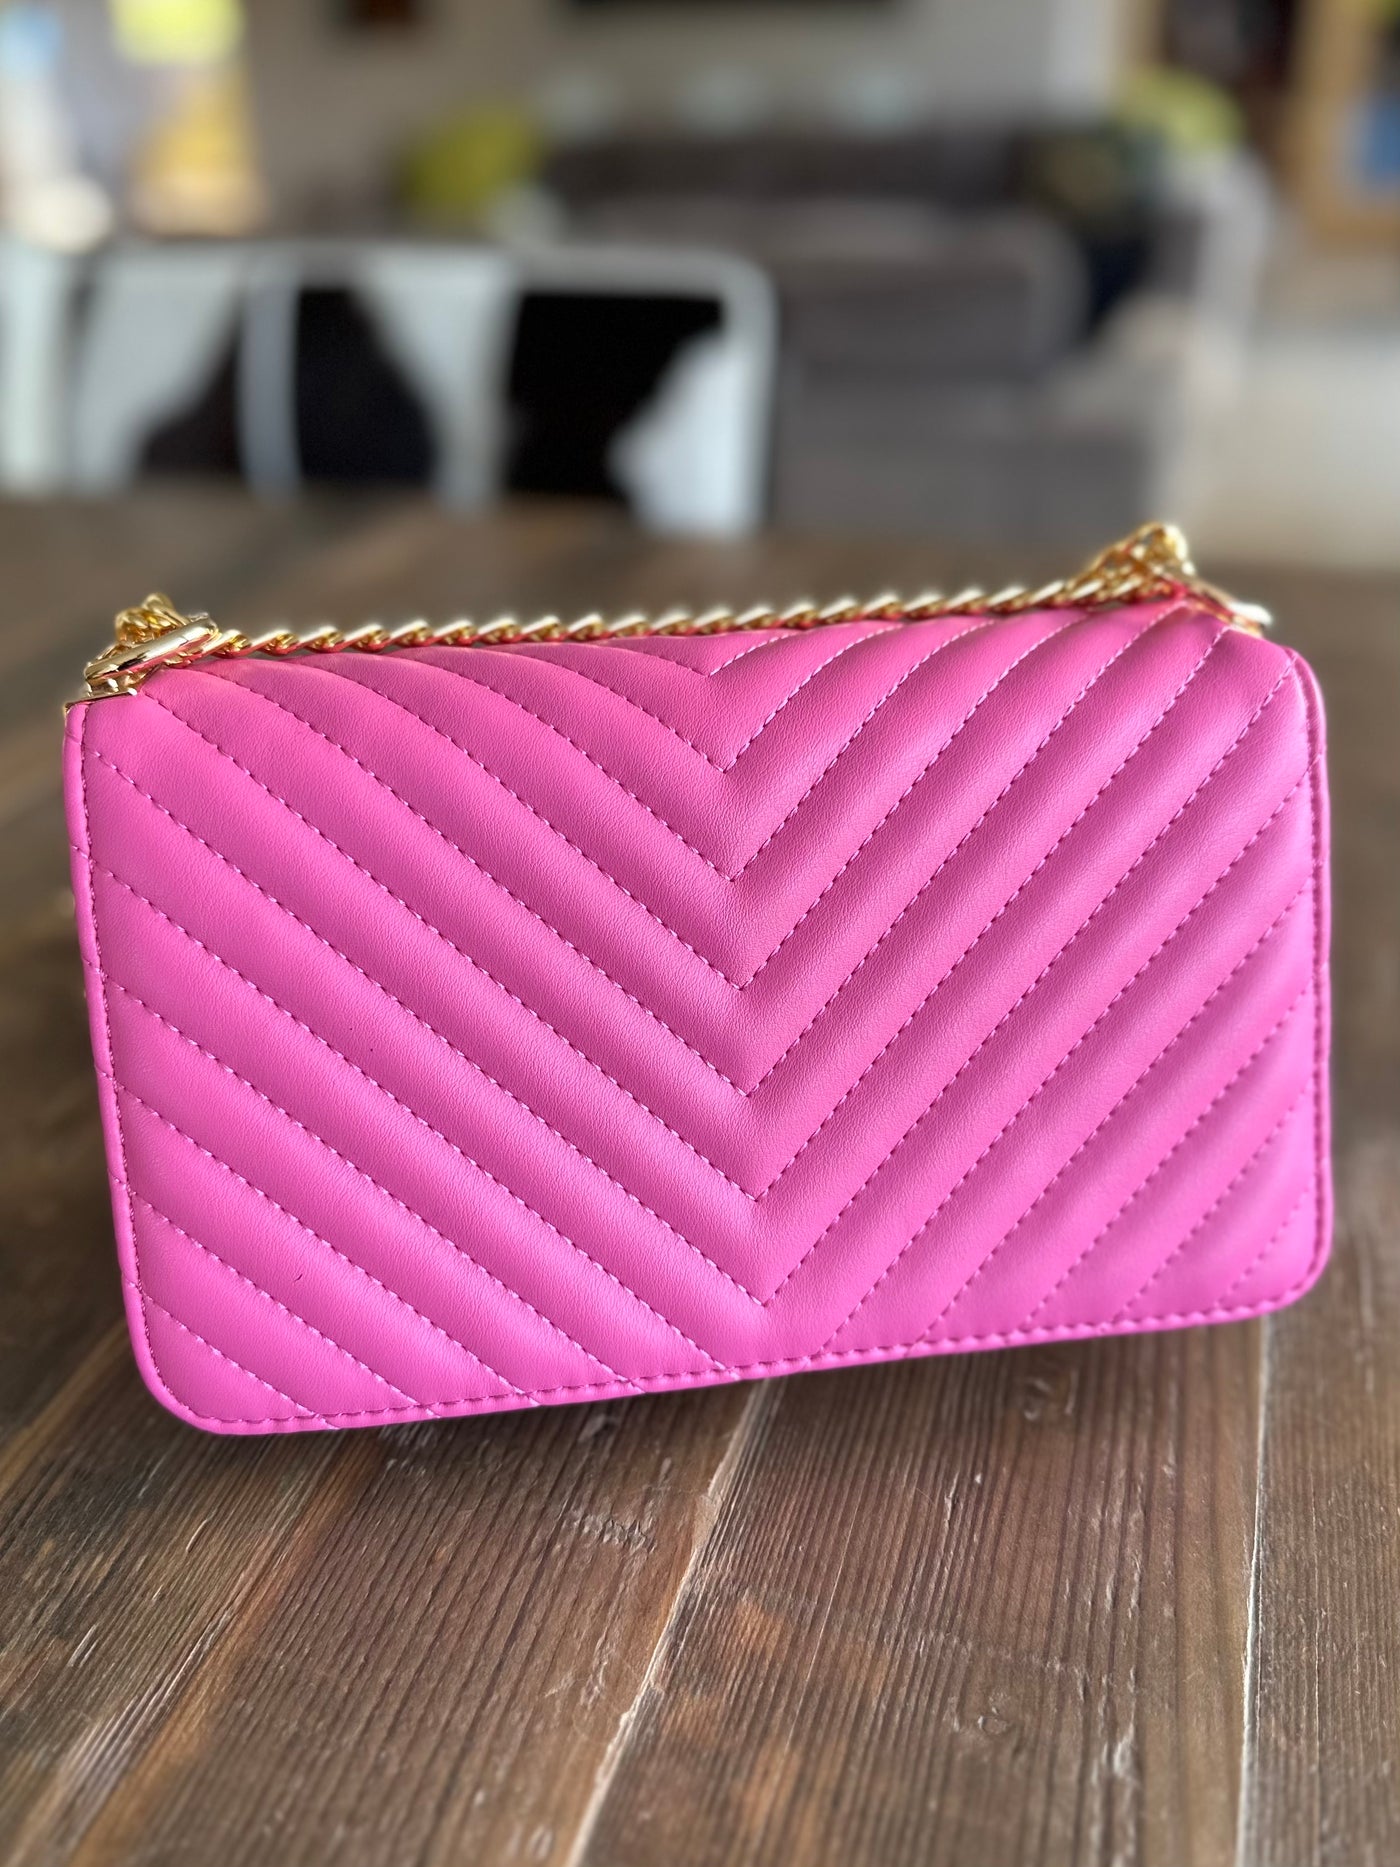 Pink Padded Gold Chain Bag